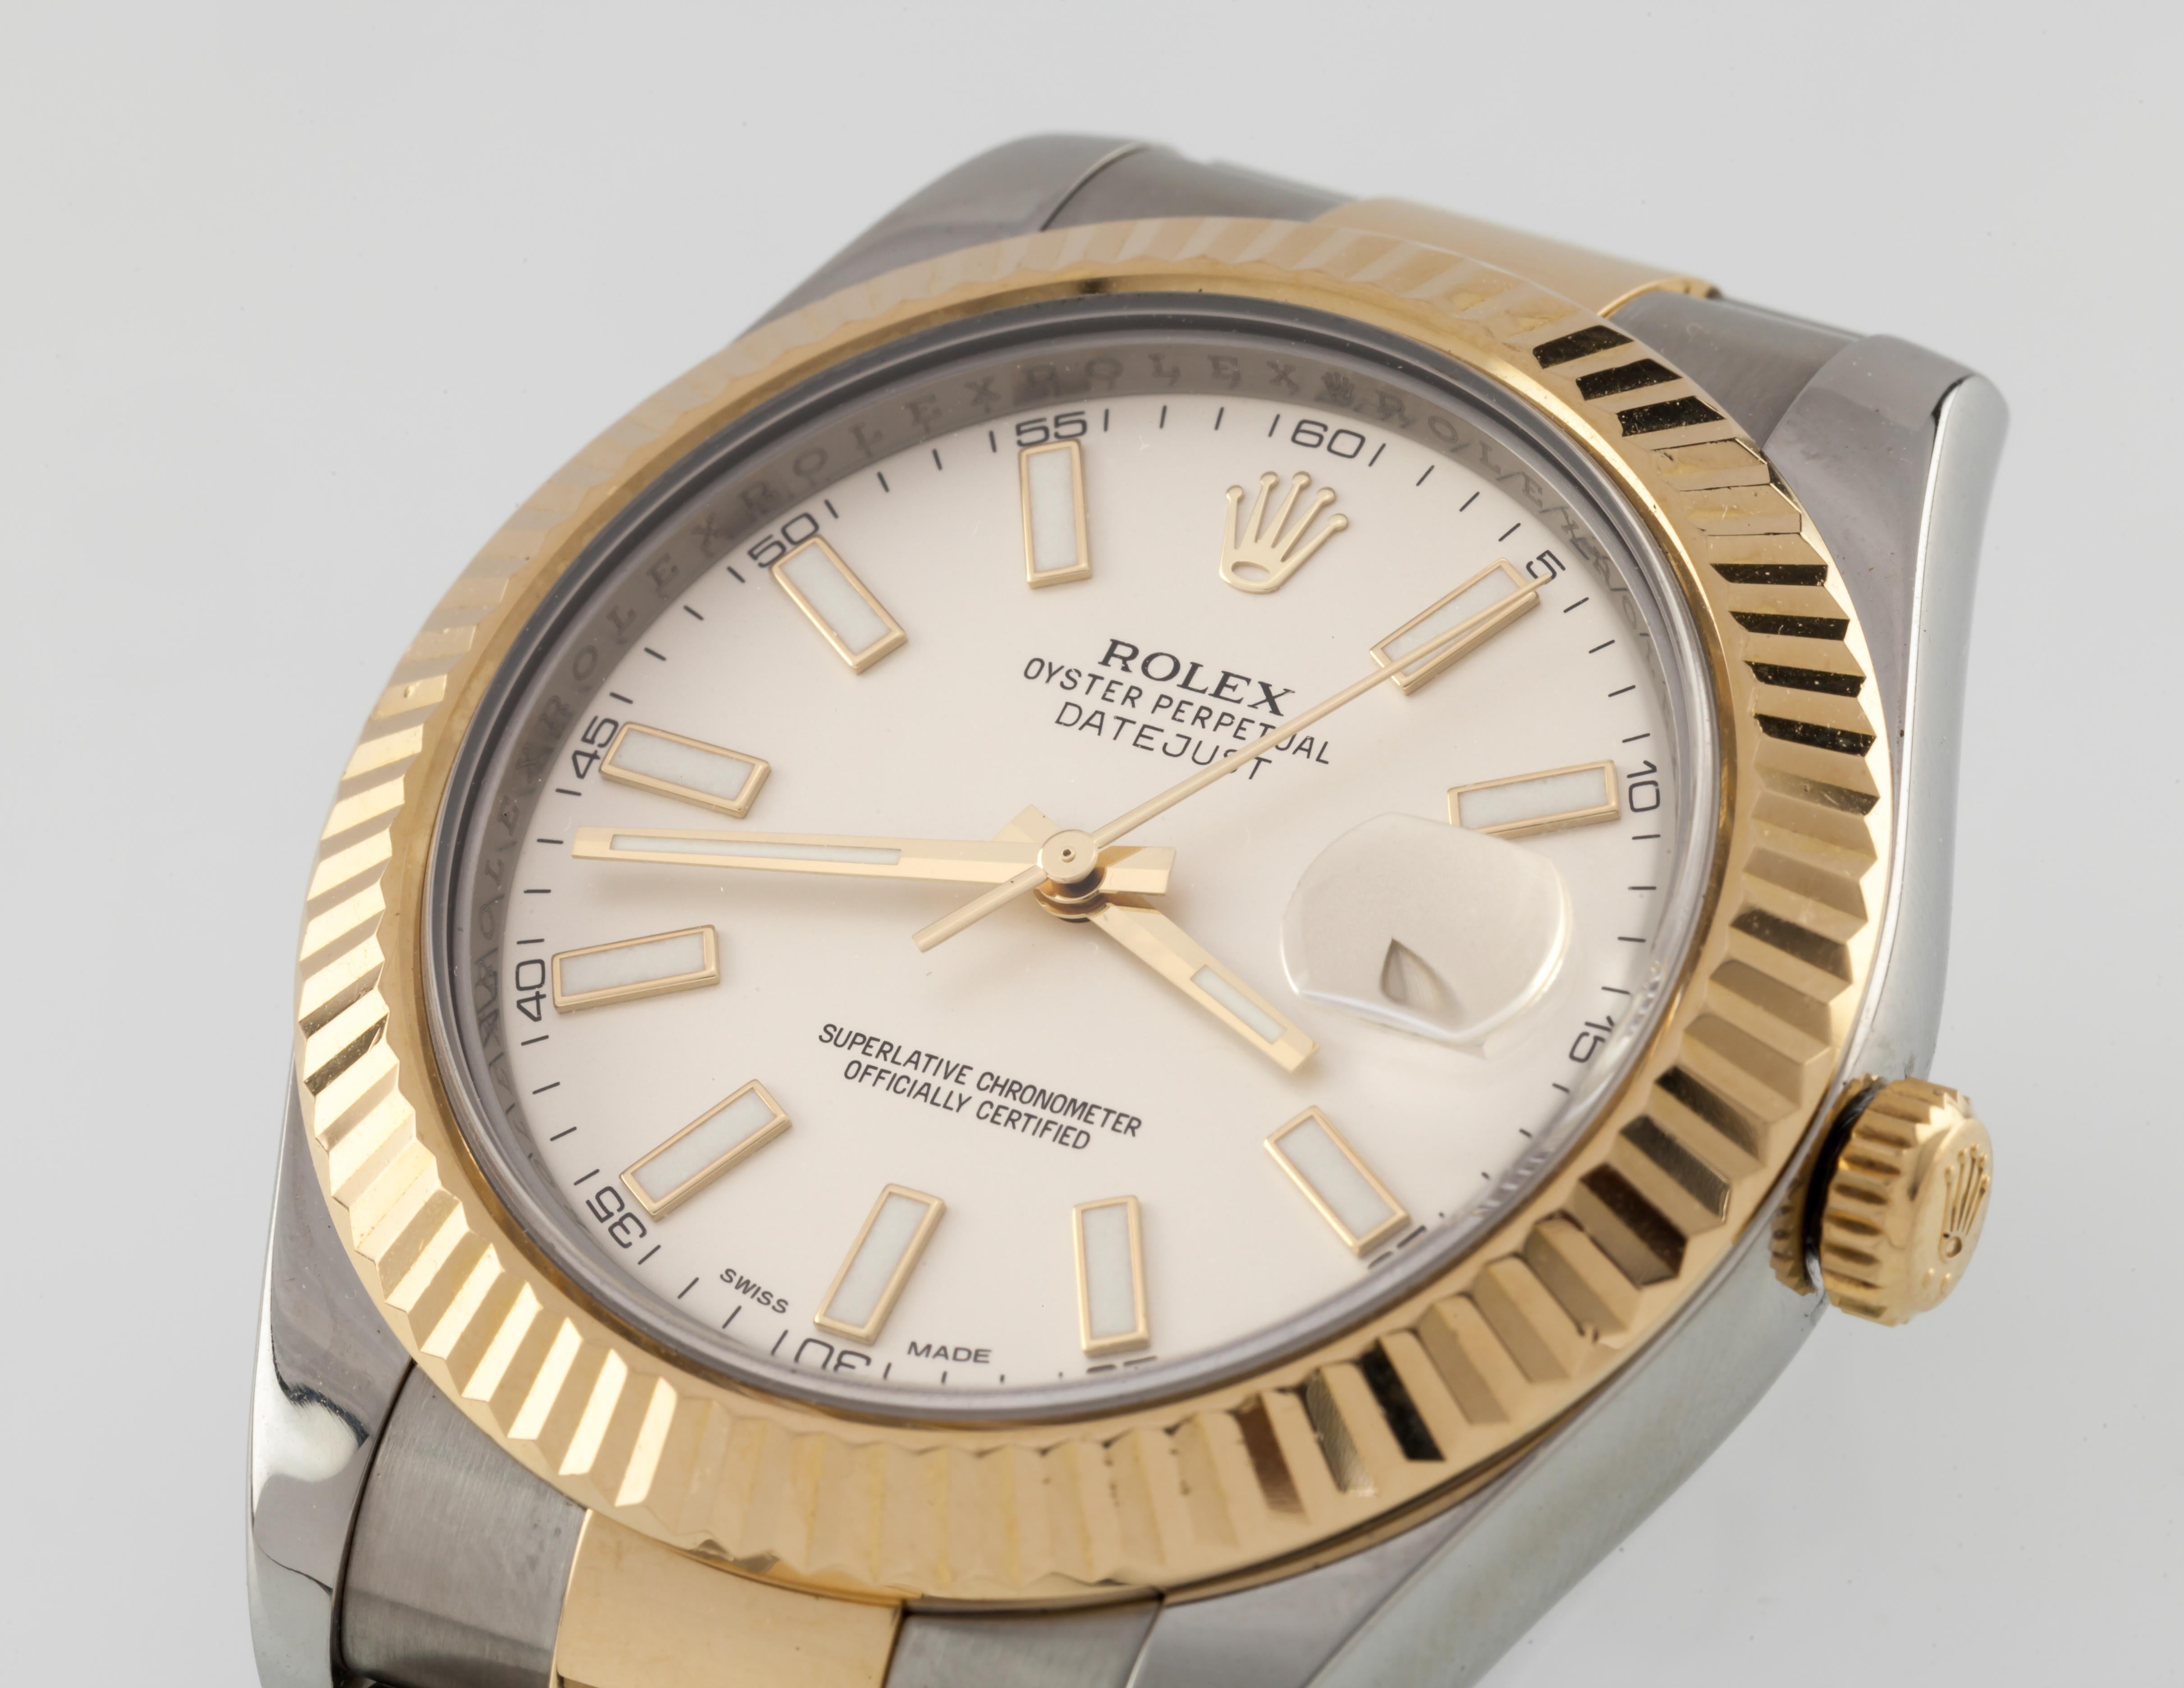 Rolex Two-Tone 18k Gold + Stainless Men's OPDJ 116333 Automatic Watch 2010 For Sale 5